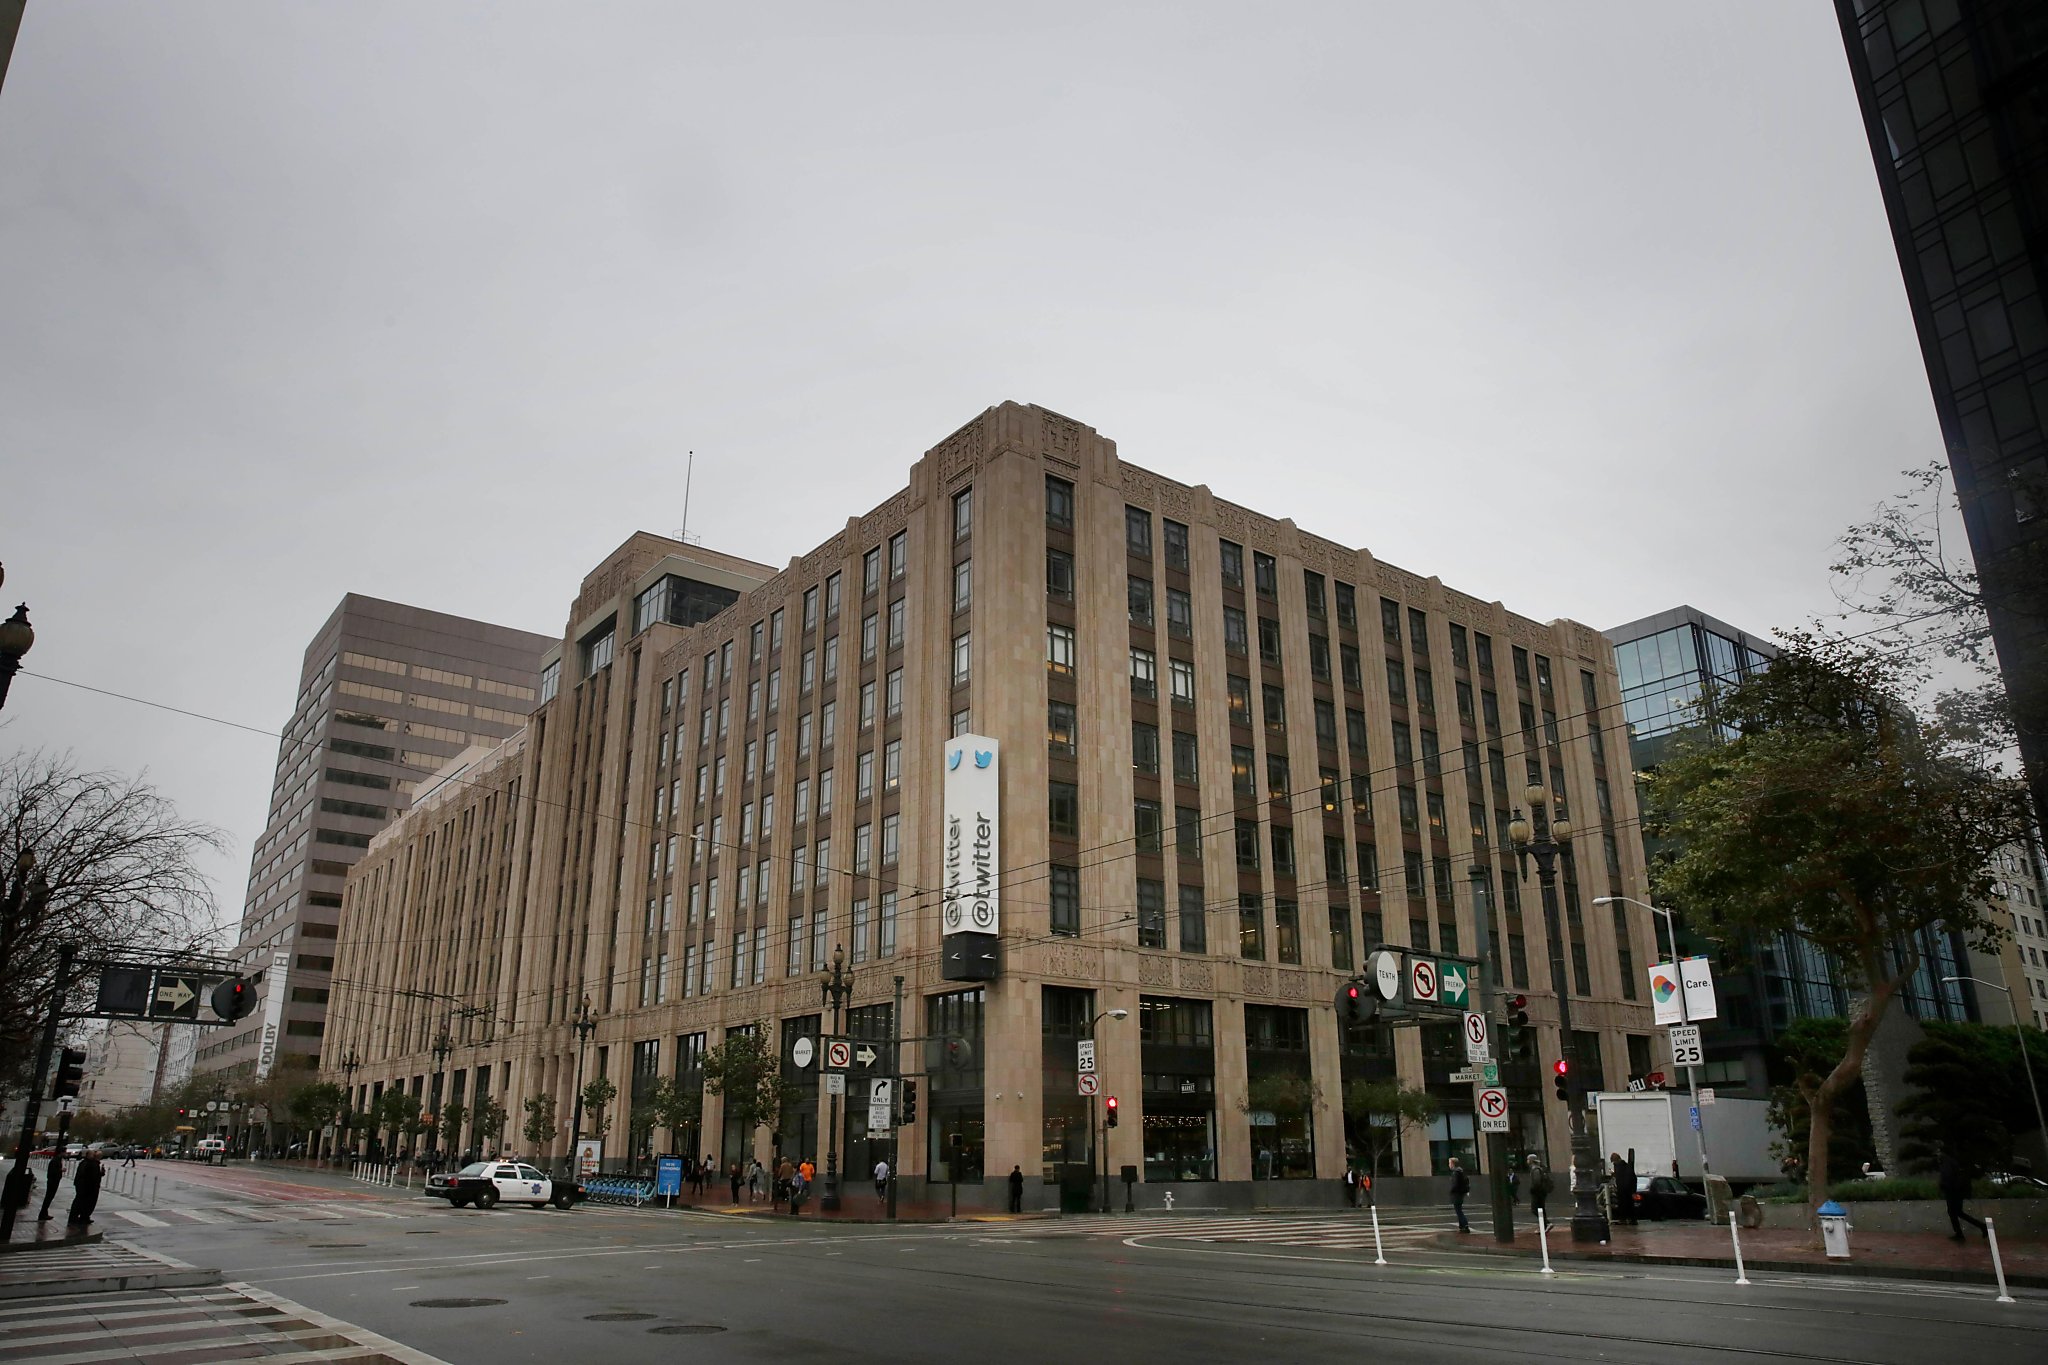 Twitter seeks subtenants for its SF HQ, as its own employees stay home